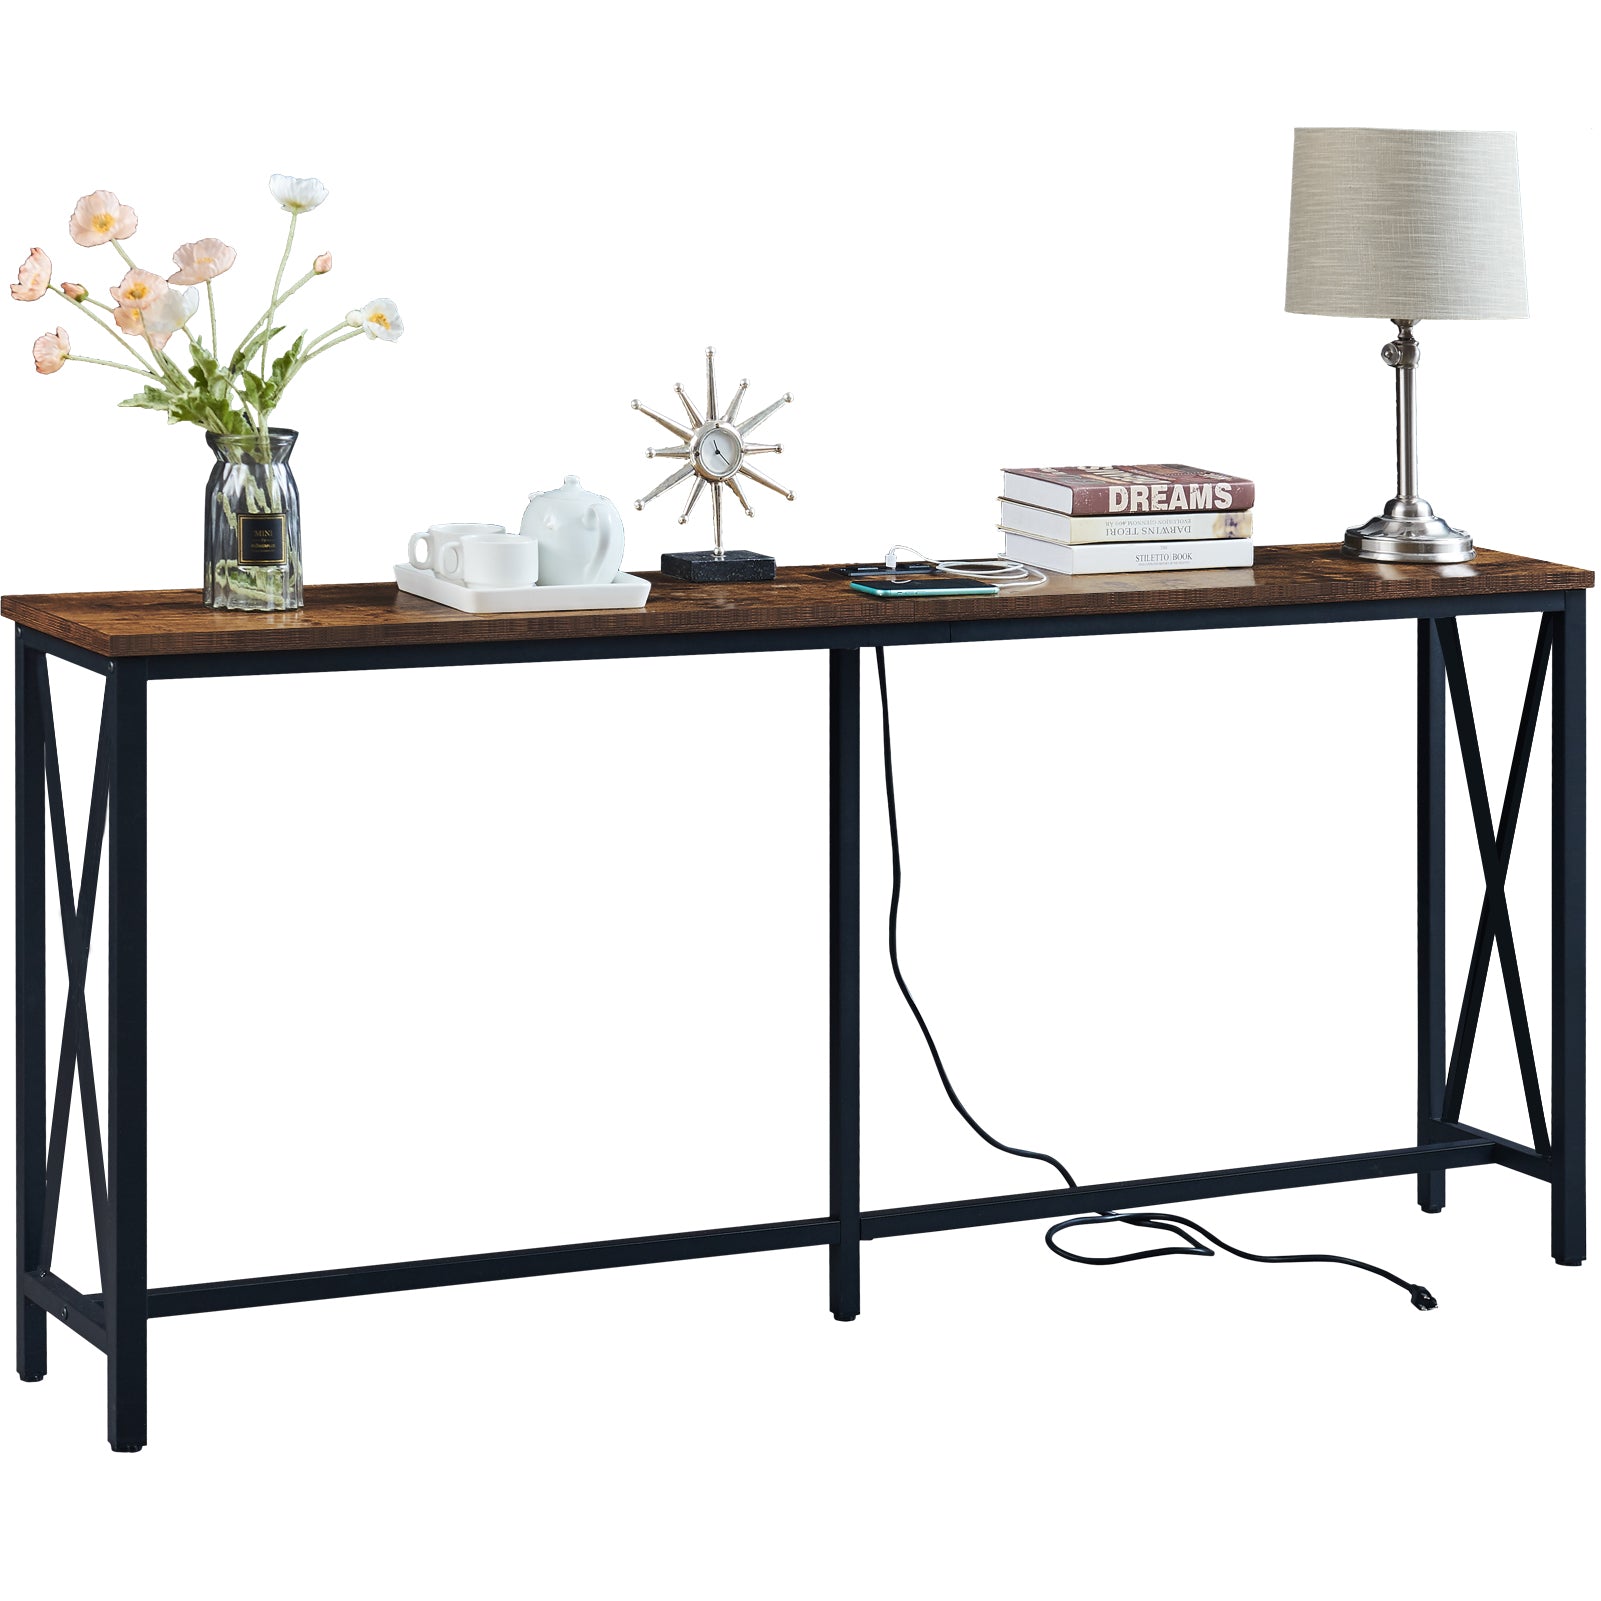 HOOBRO 70.9 Narrow Console Table Entryway Table Behind Couch